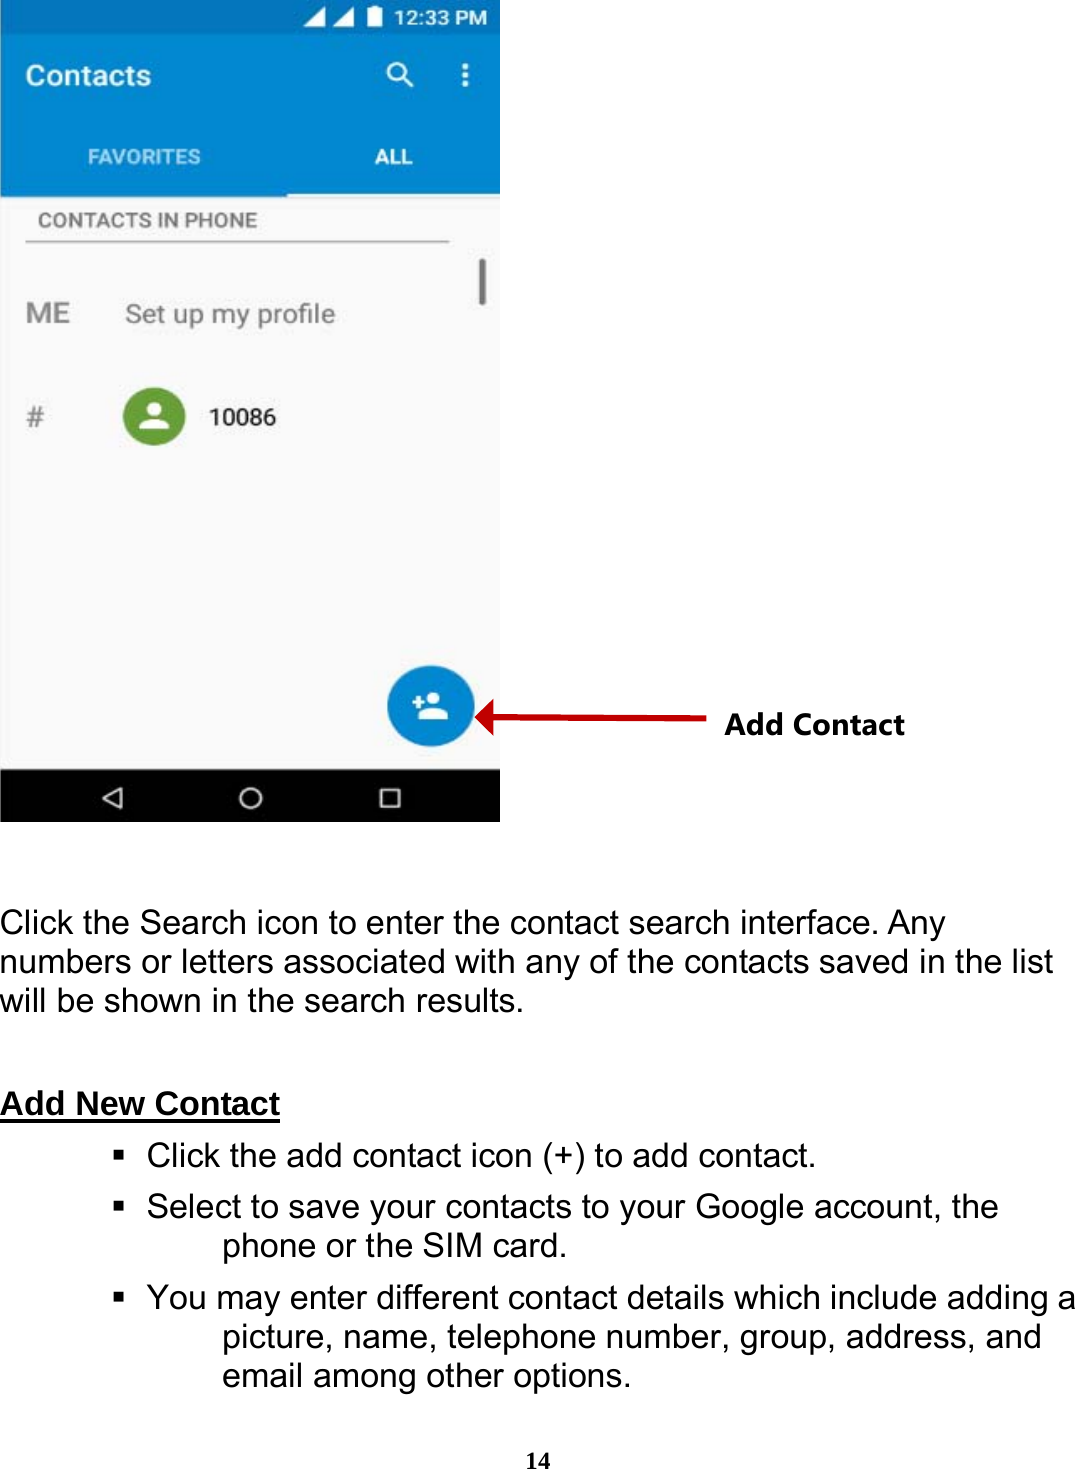  14   Click the Search icon to enter the contact search interface. Any numbers or letters associated with any of the contacts saved in the list will be shown in the search results.  Add New Contact                                                       Click the add contact icon (+) to add contact.      Select to save your contacts to your Google account, the phone or the SIM card.    You may enter different contact details which include adding a picture, name, telephone number, group, address, and email among other options. Add Contact 